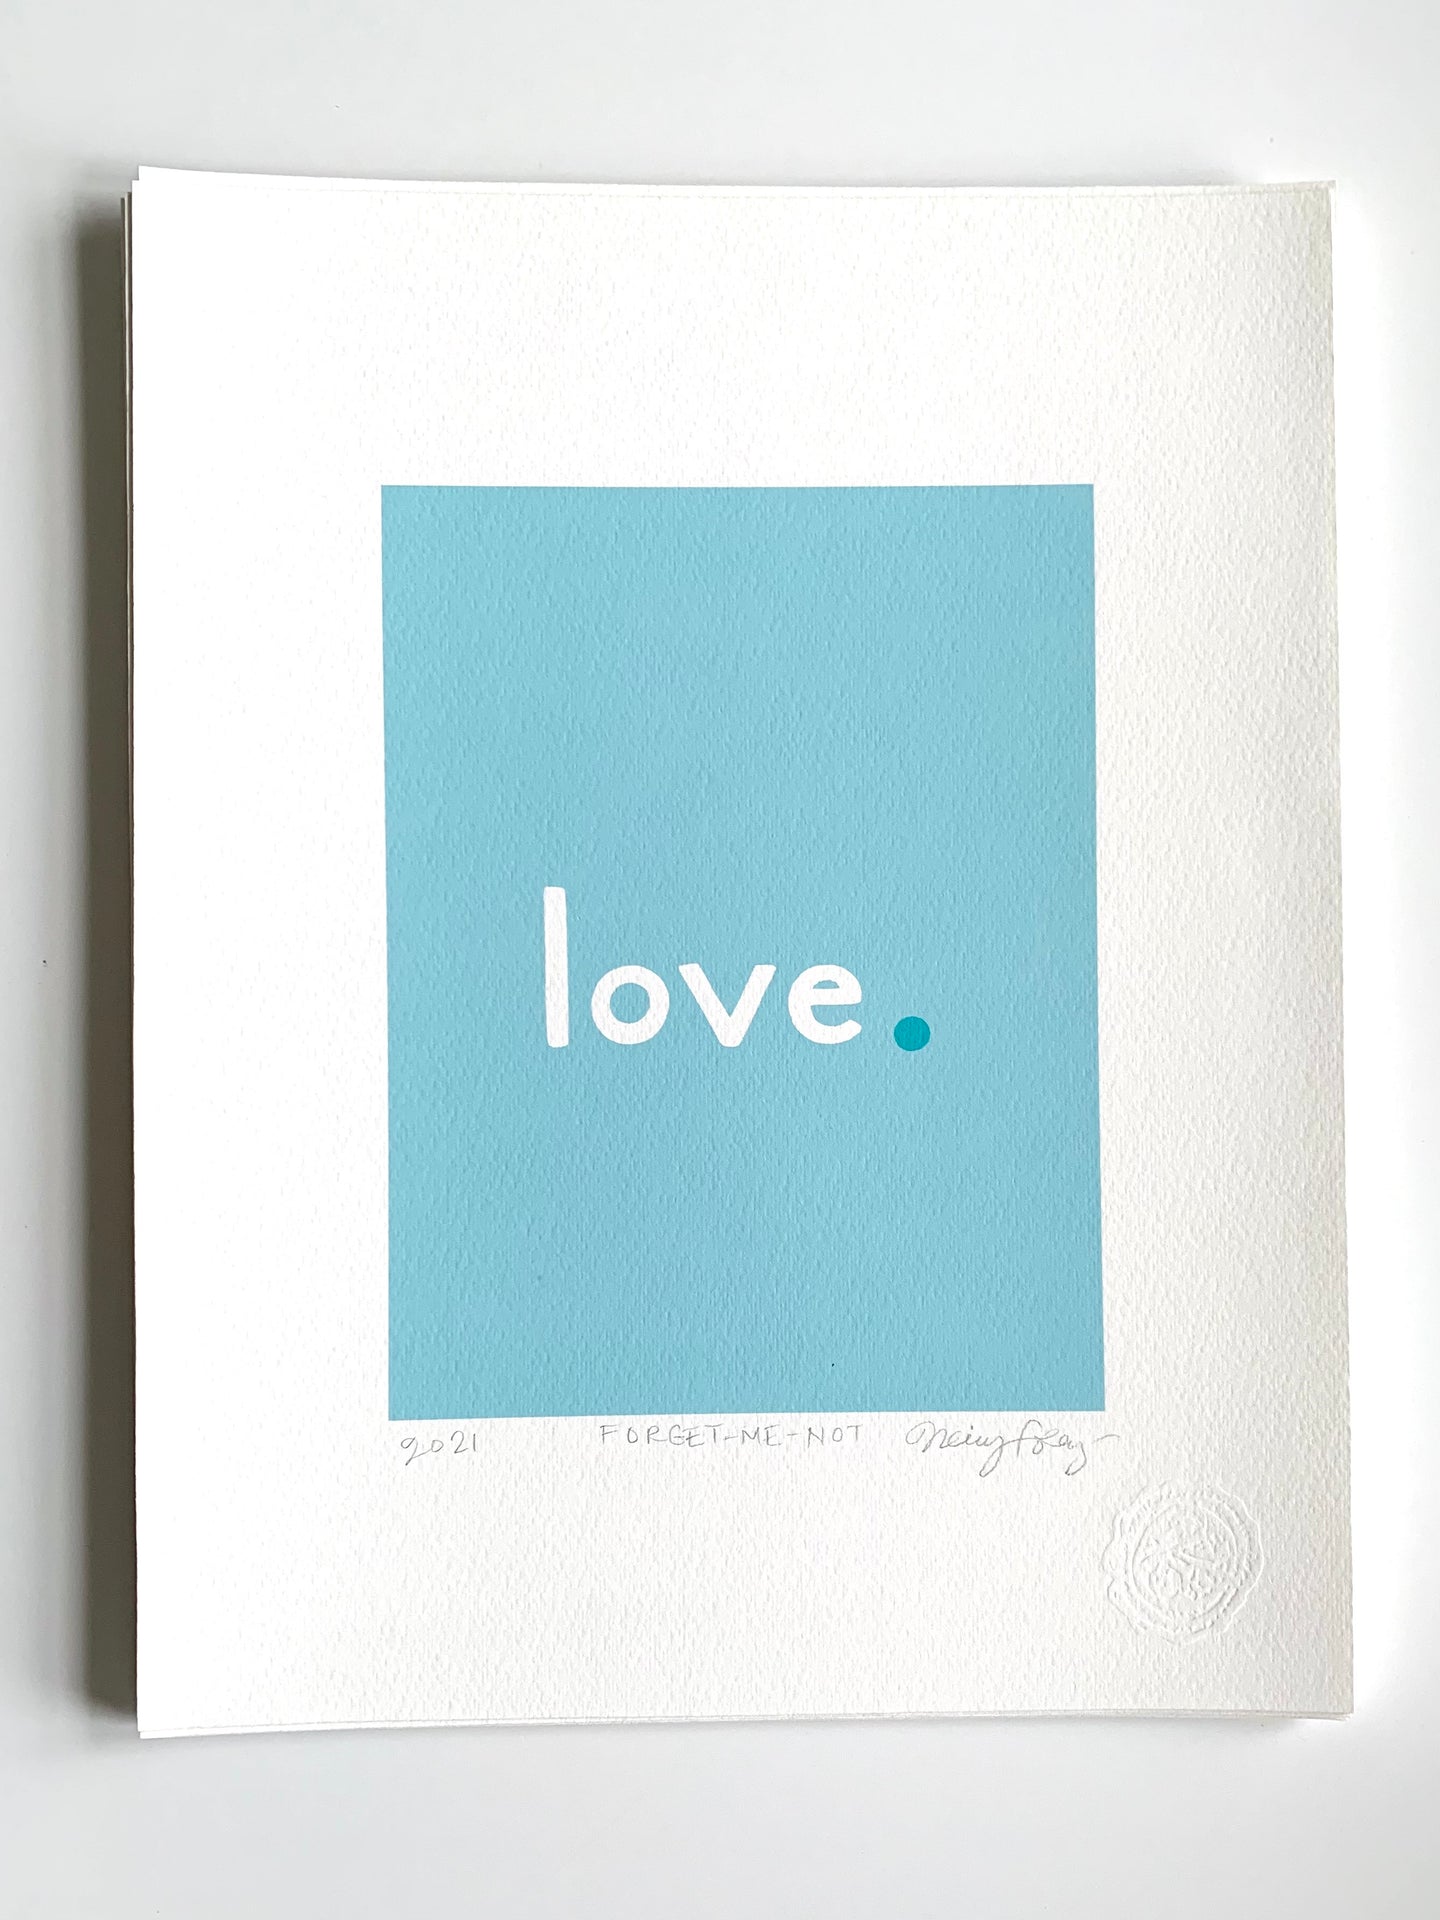 the love print 11 x 14 Giclee on paper 16 COLORS